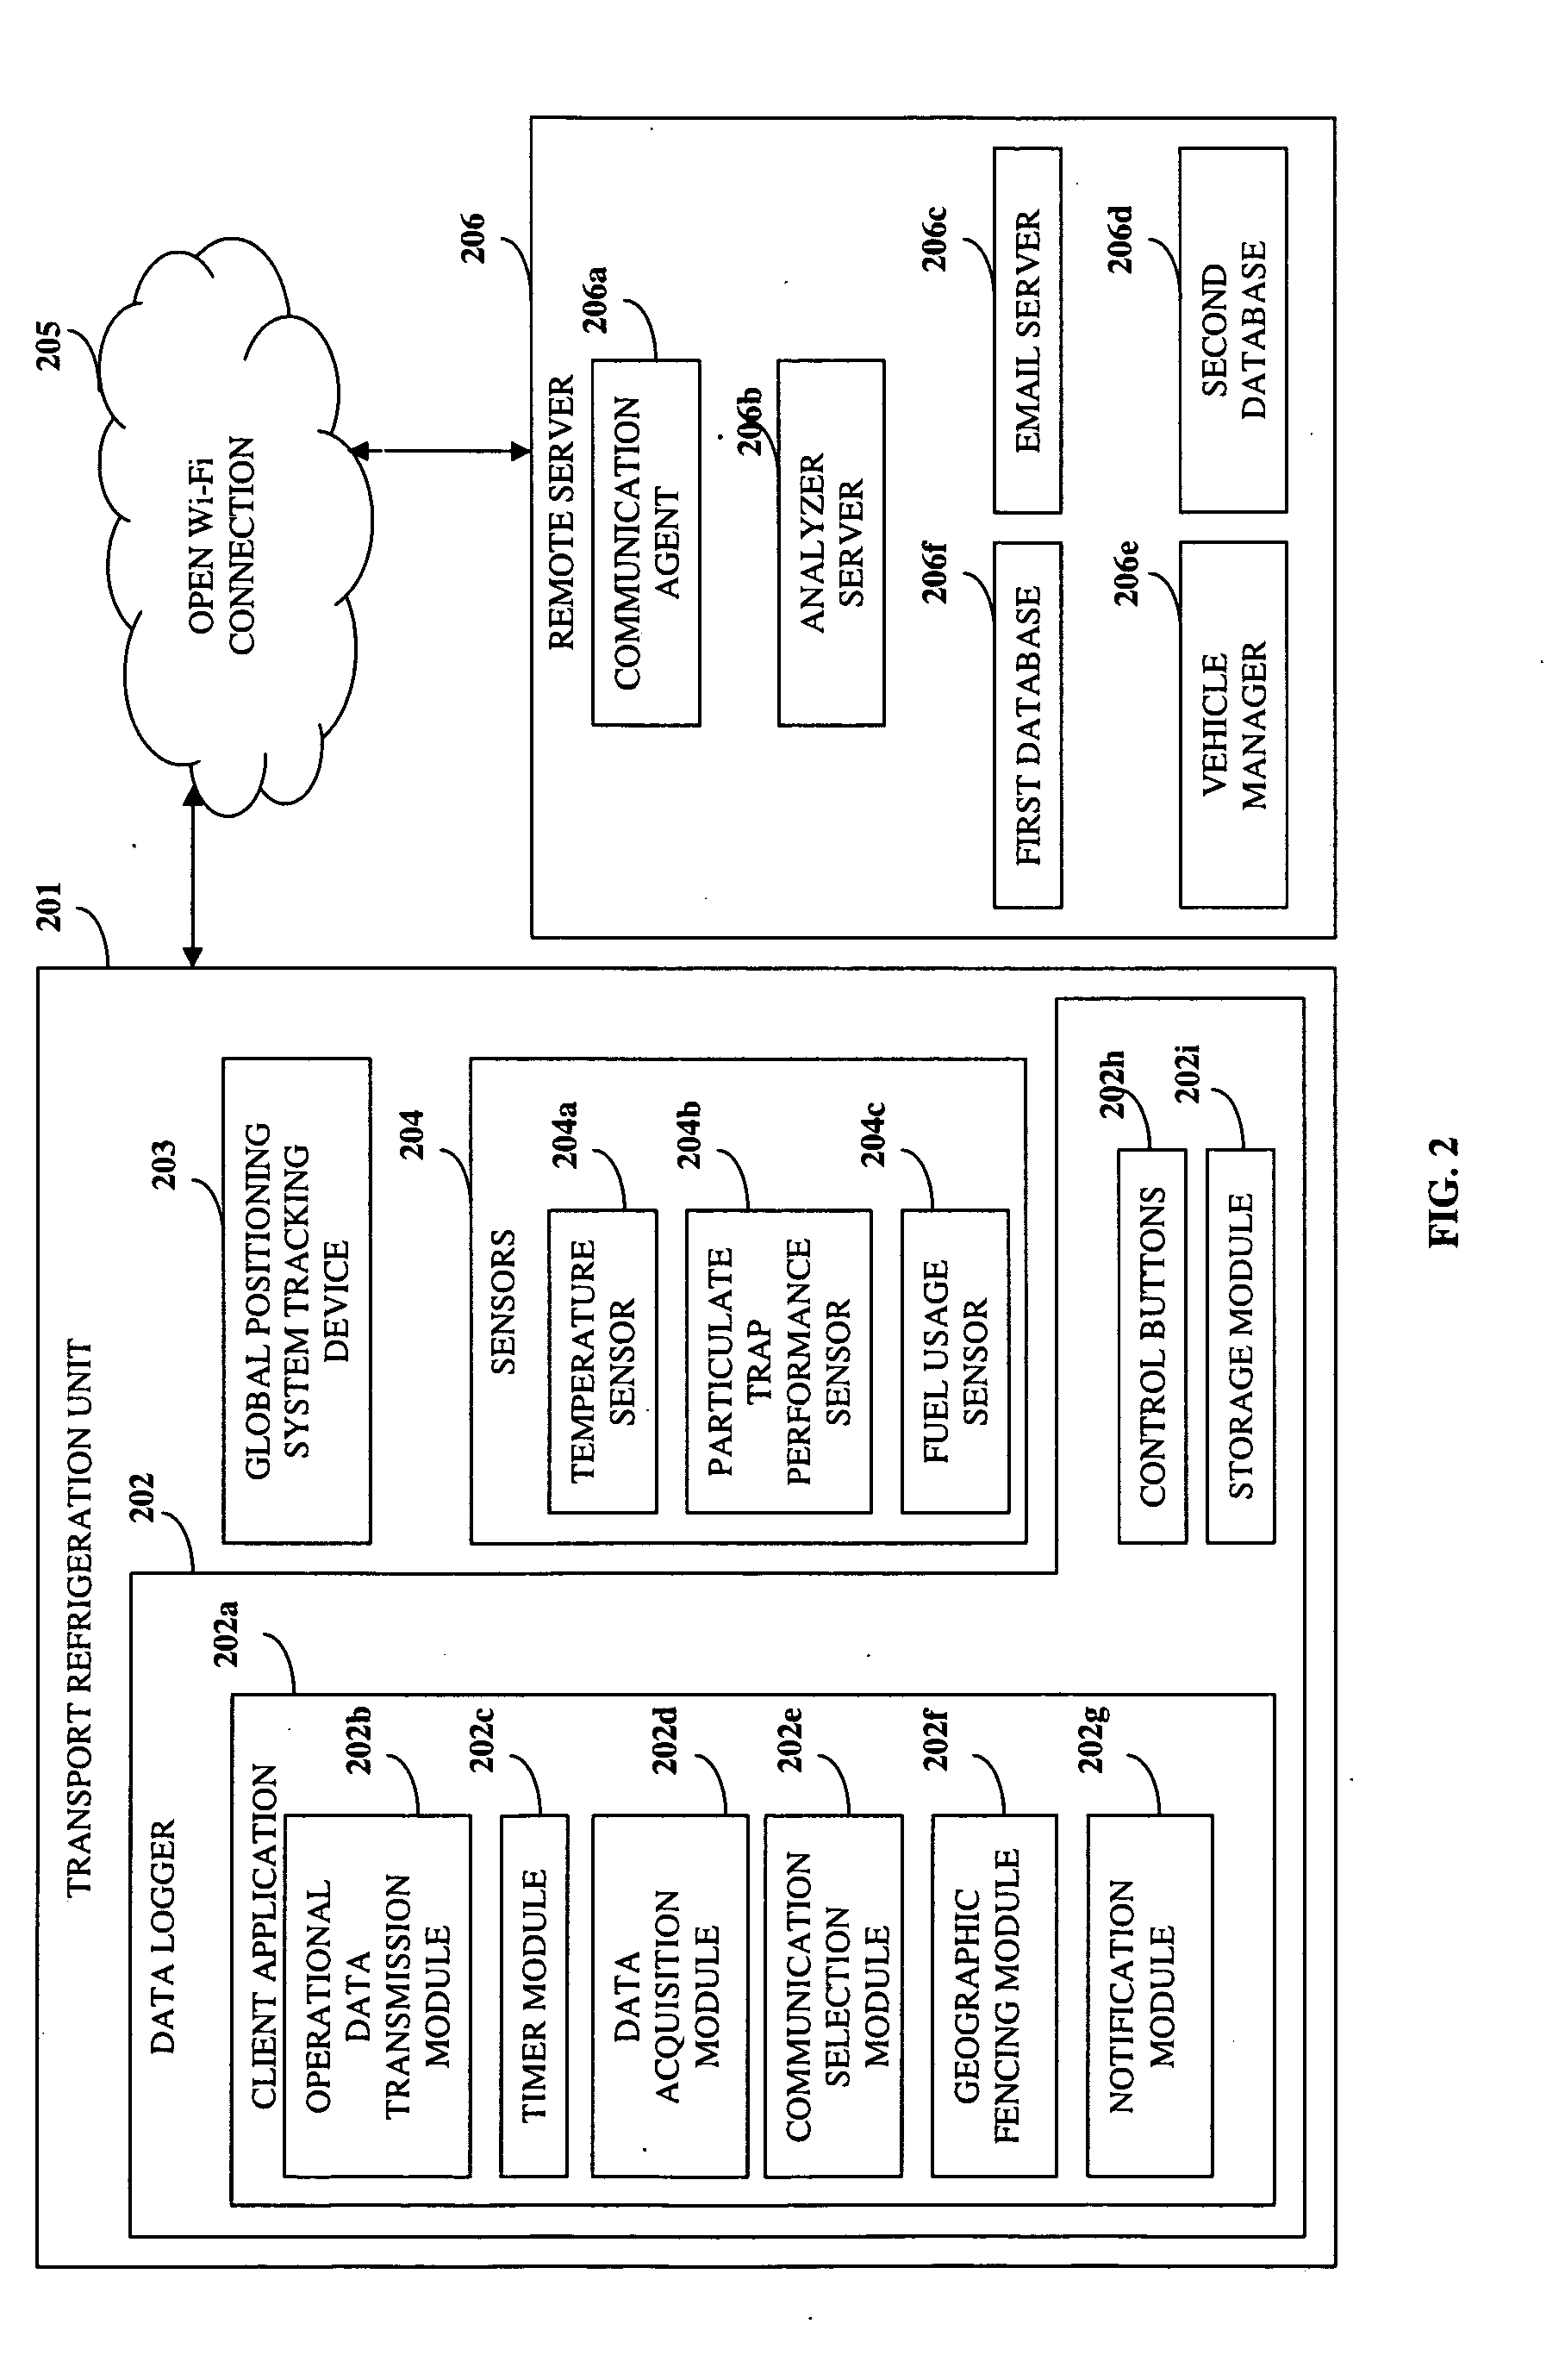 Position Based Operational Tracking Of A Transport Refrigeration Unit